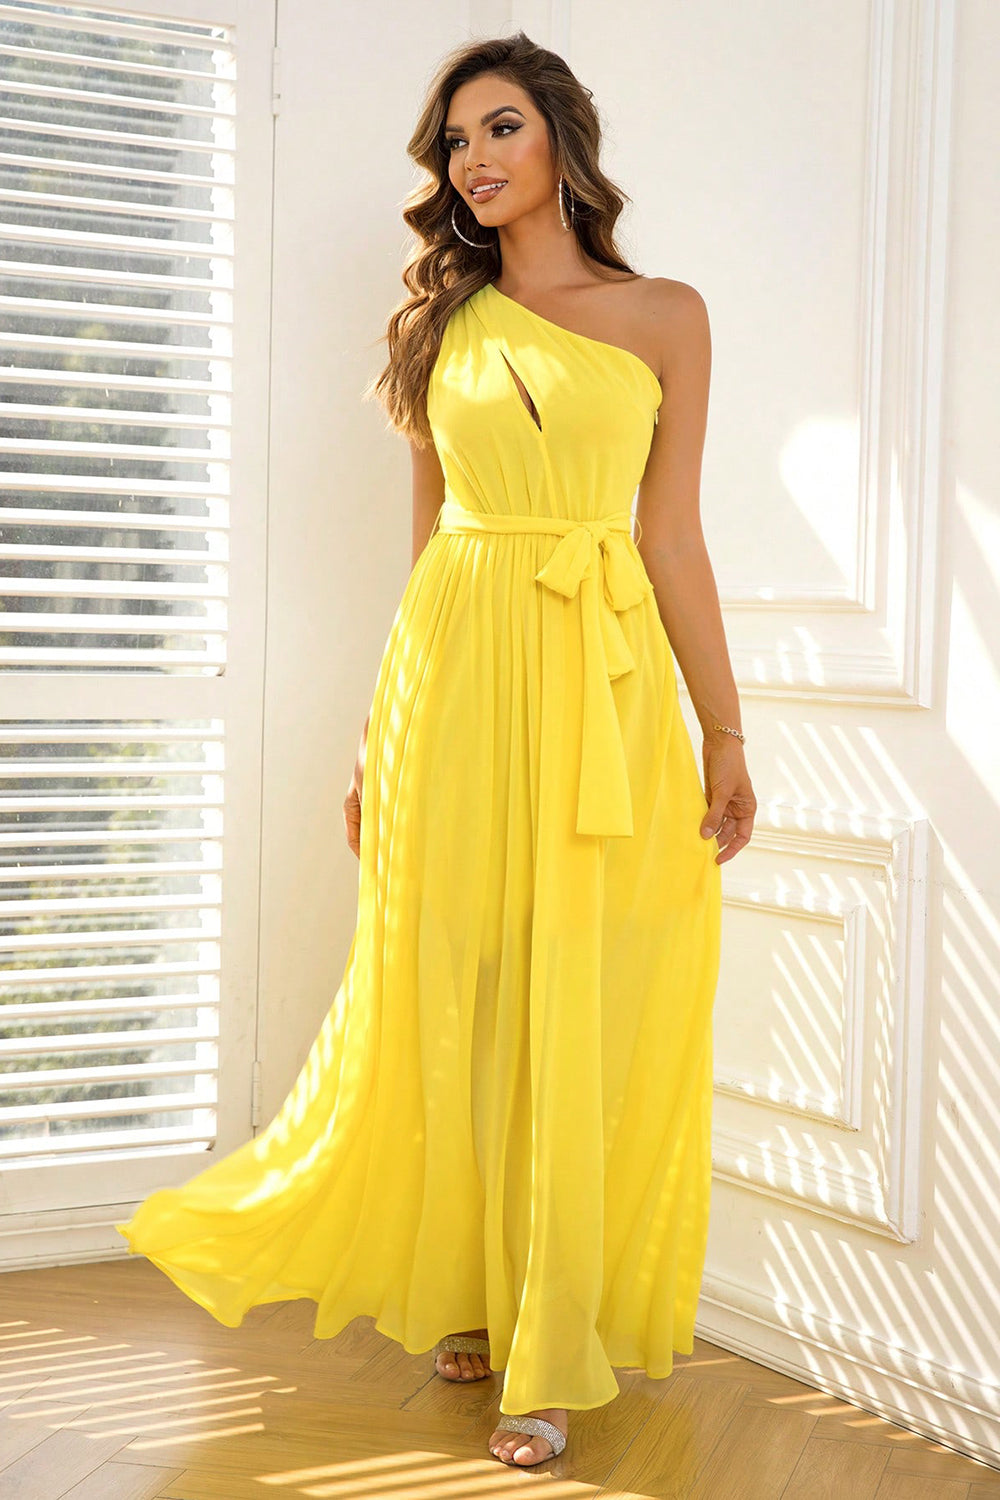 Full-length yellow gown with a single shoulder strap and a delicate waist tie